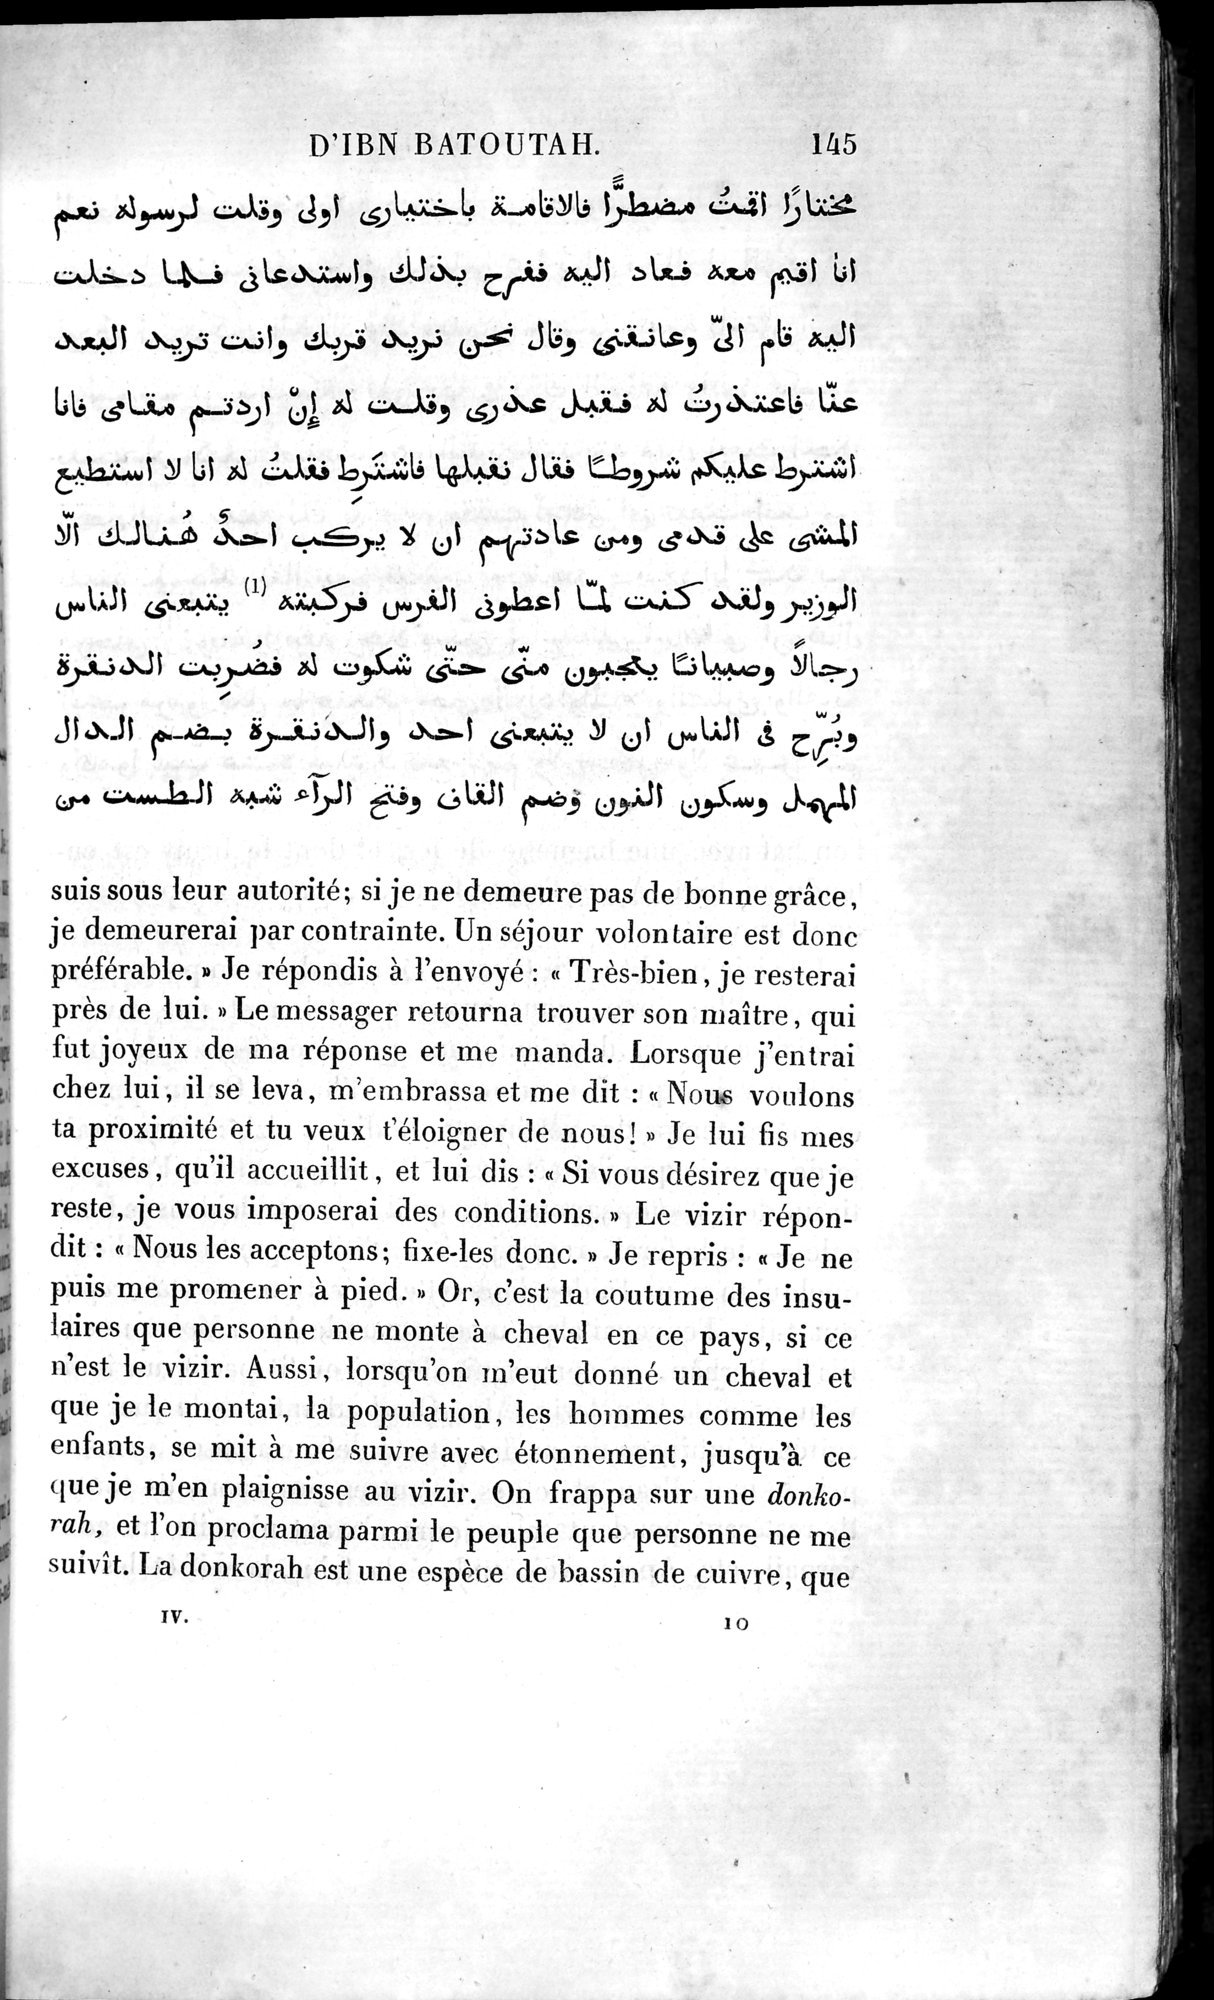 Voyages d'Ibn Batoutah : vol.4 / Page 157 (Grayscale High Resolution Image)